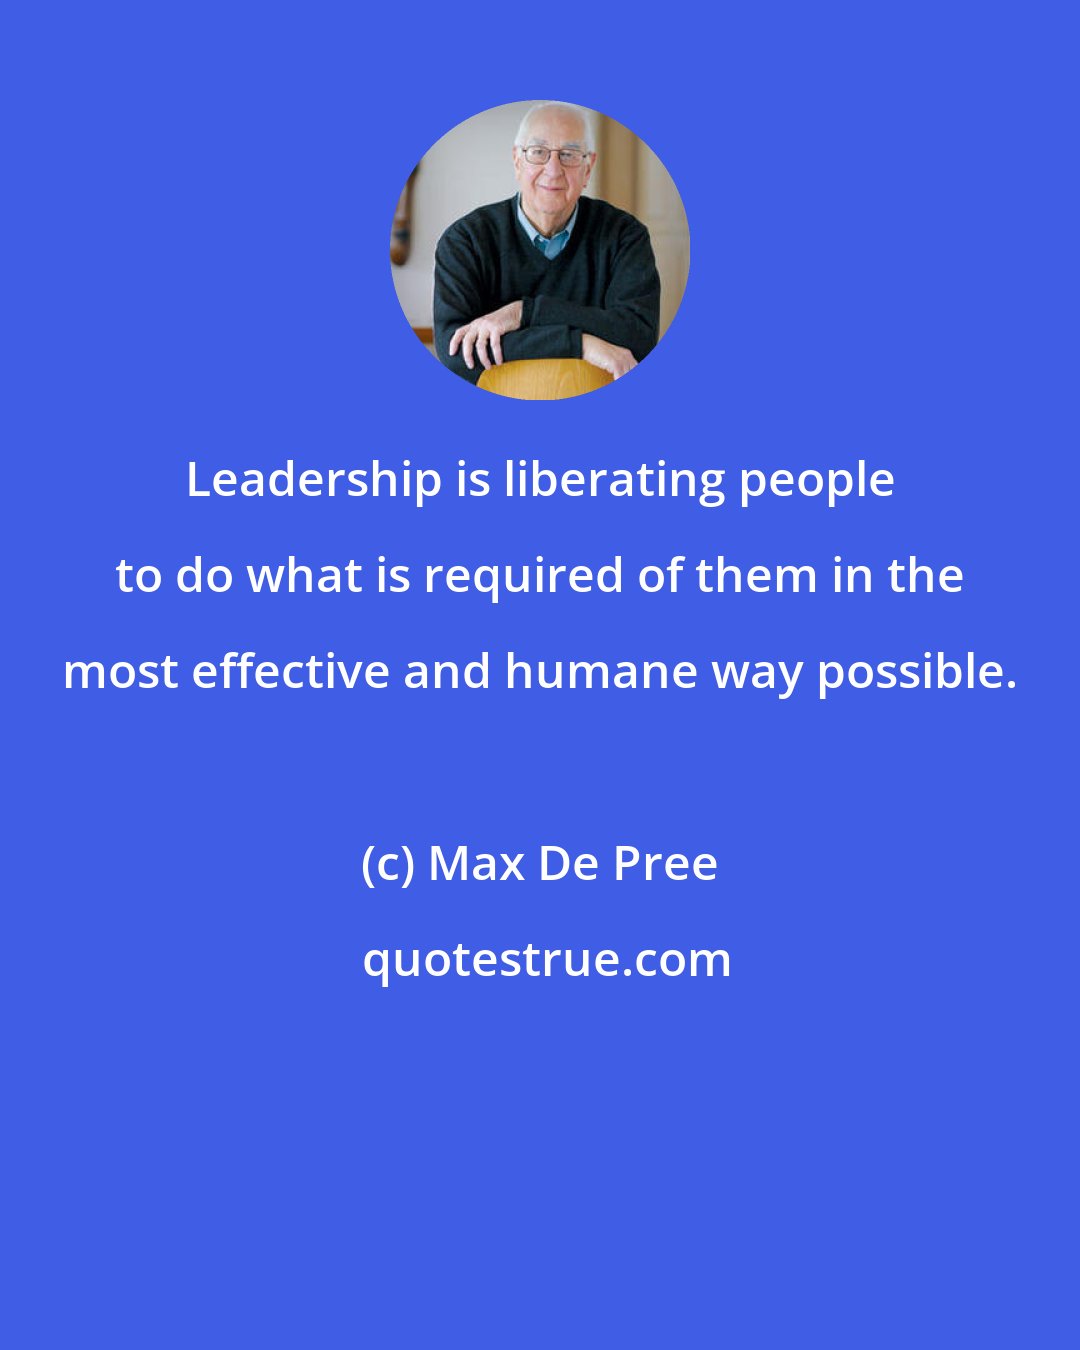 Max De Pree: Leadership is liberating people to do what is required of them in the most effective and humane way possible.